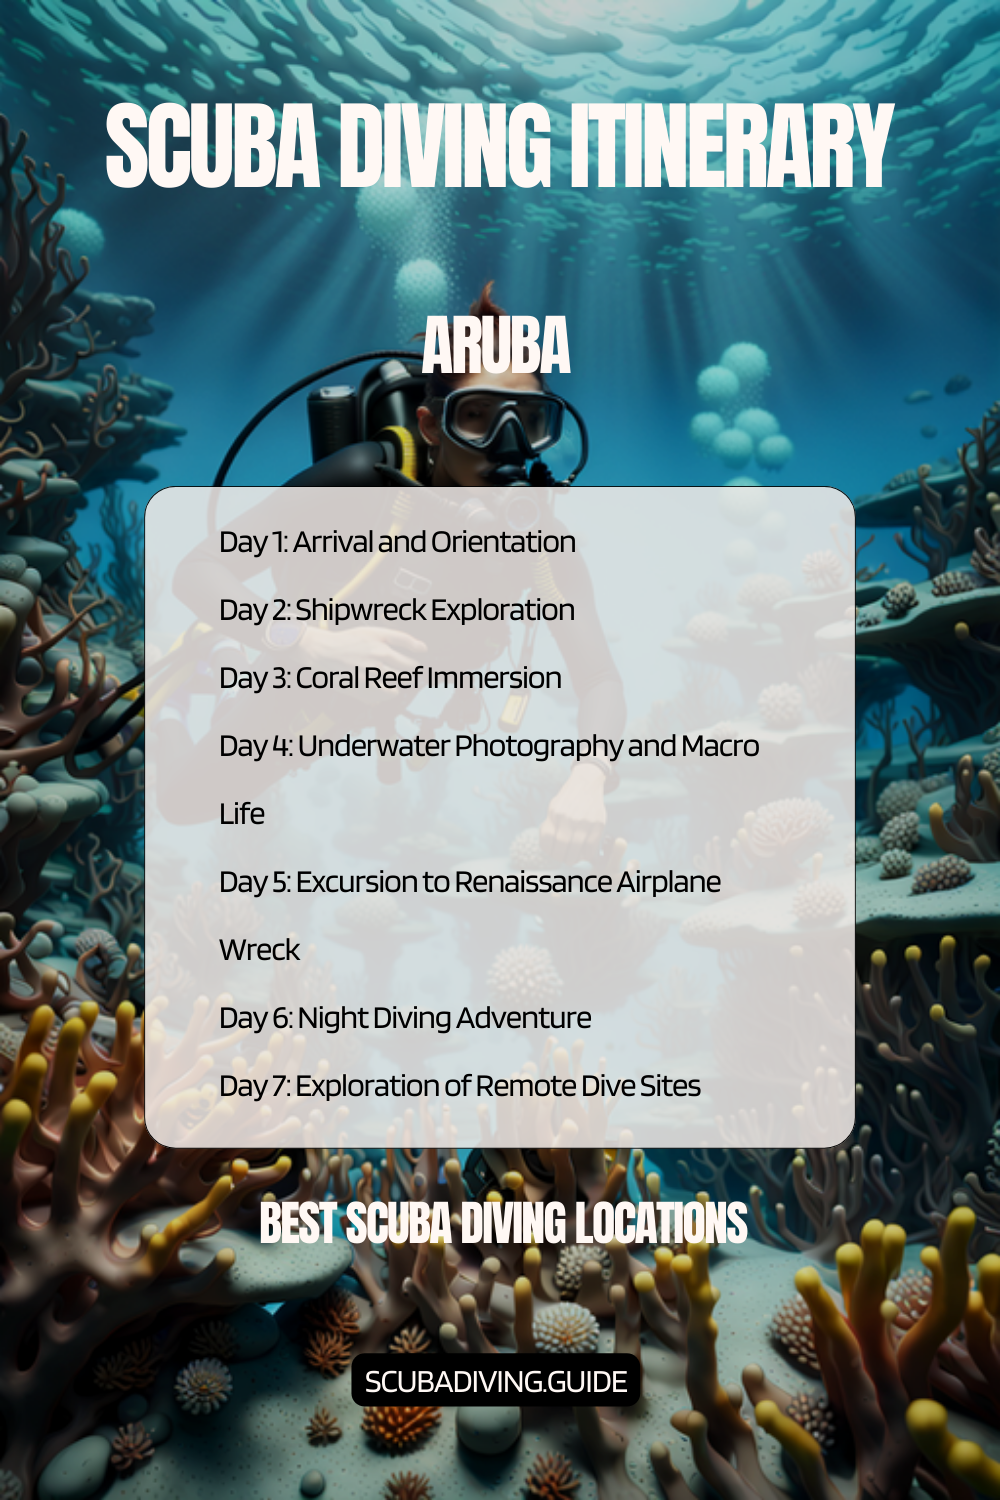 Aruba Recommended Scuba Diving Itinerary